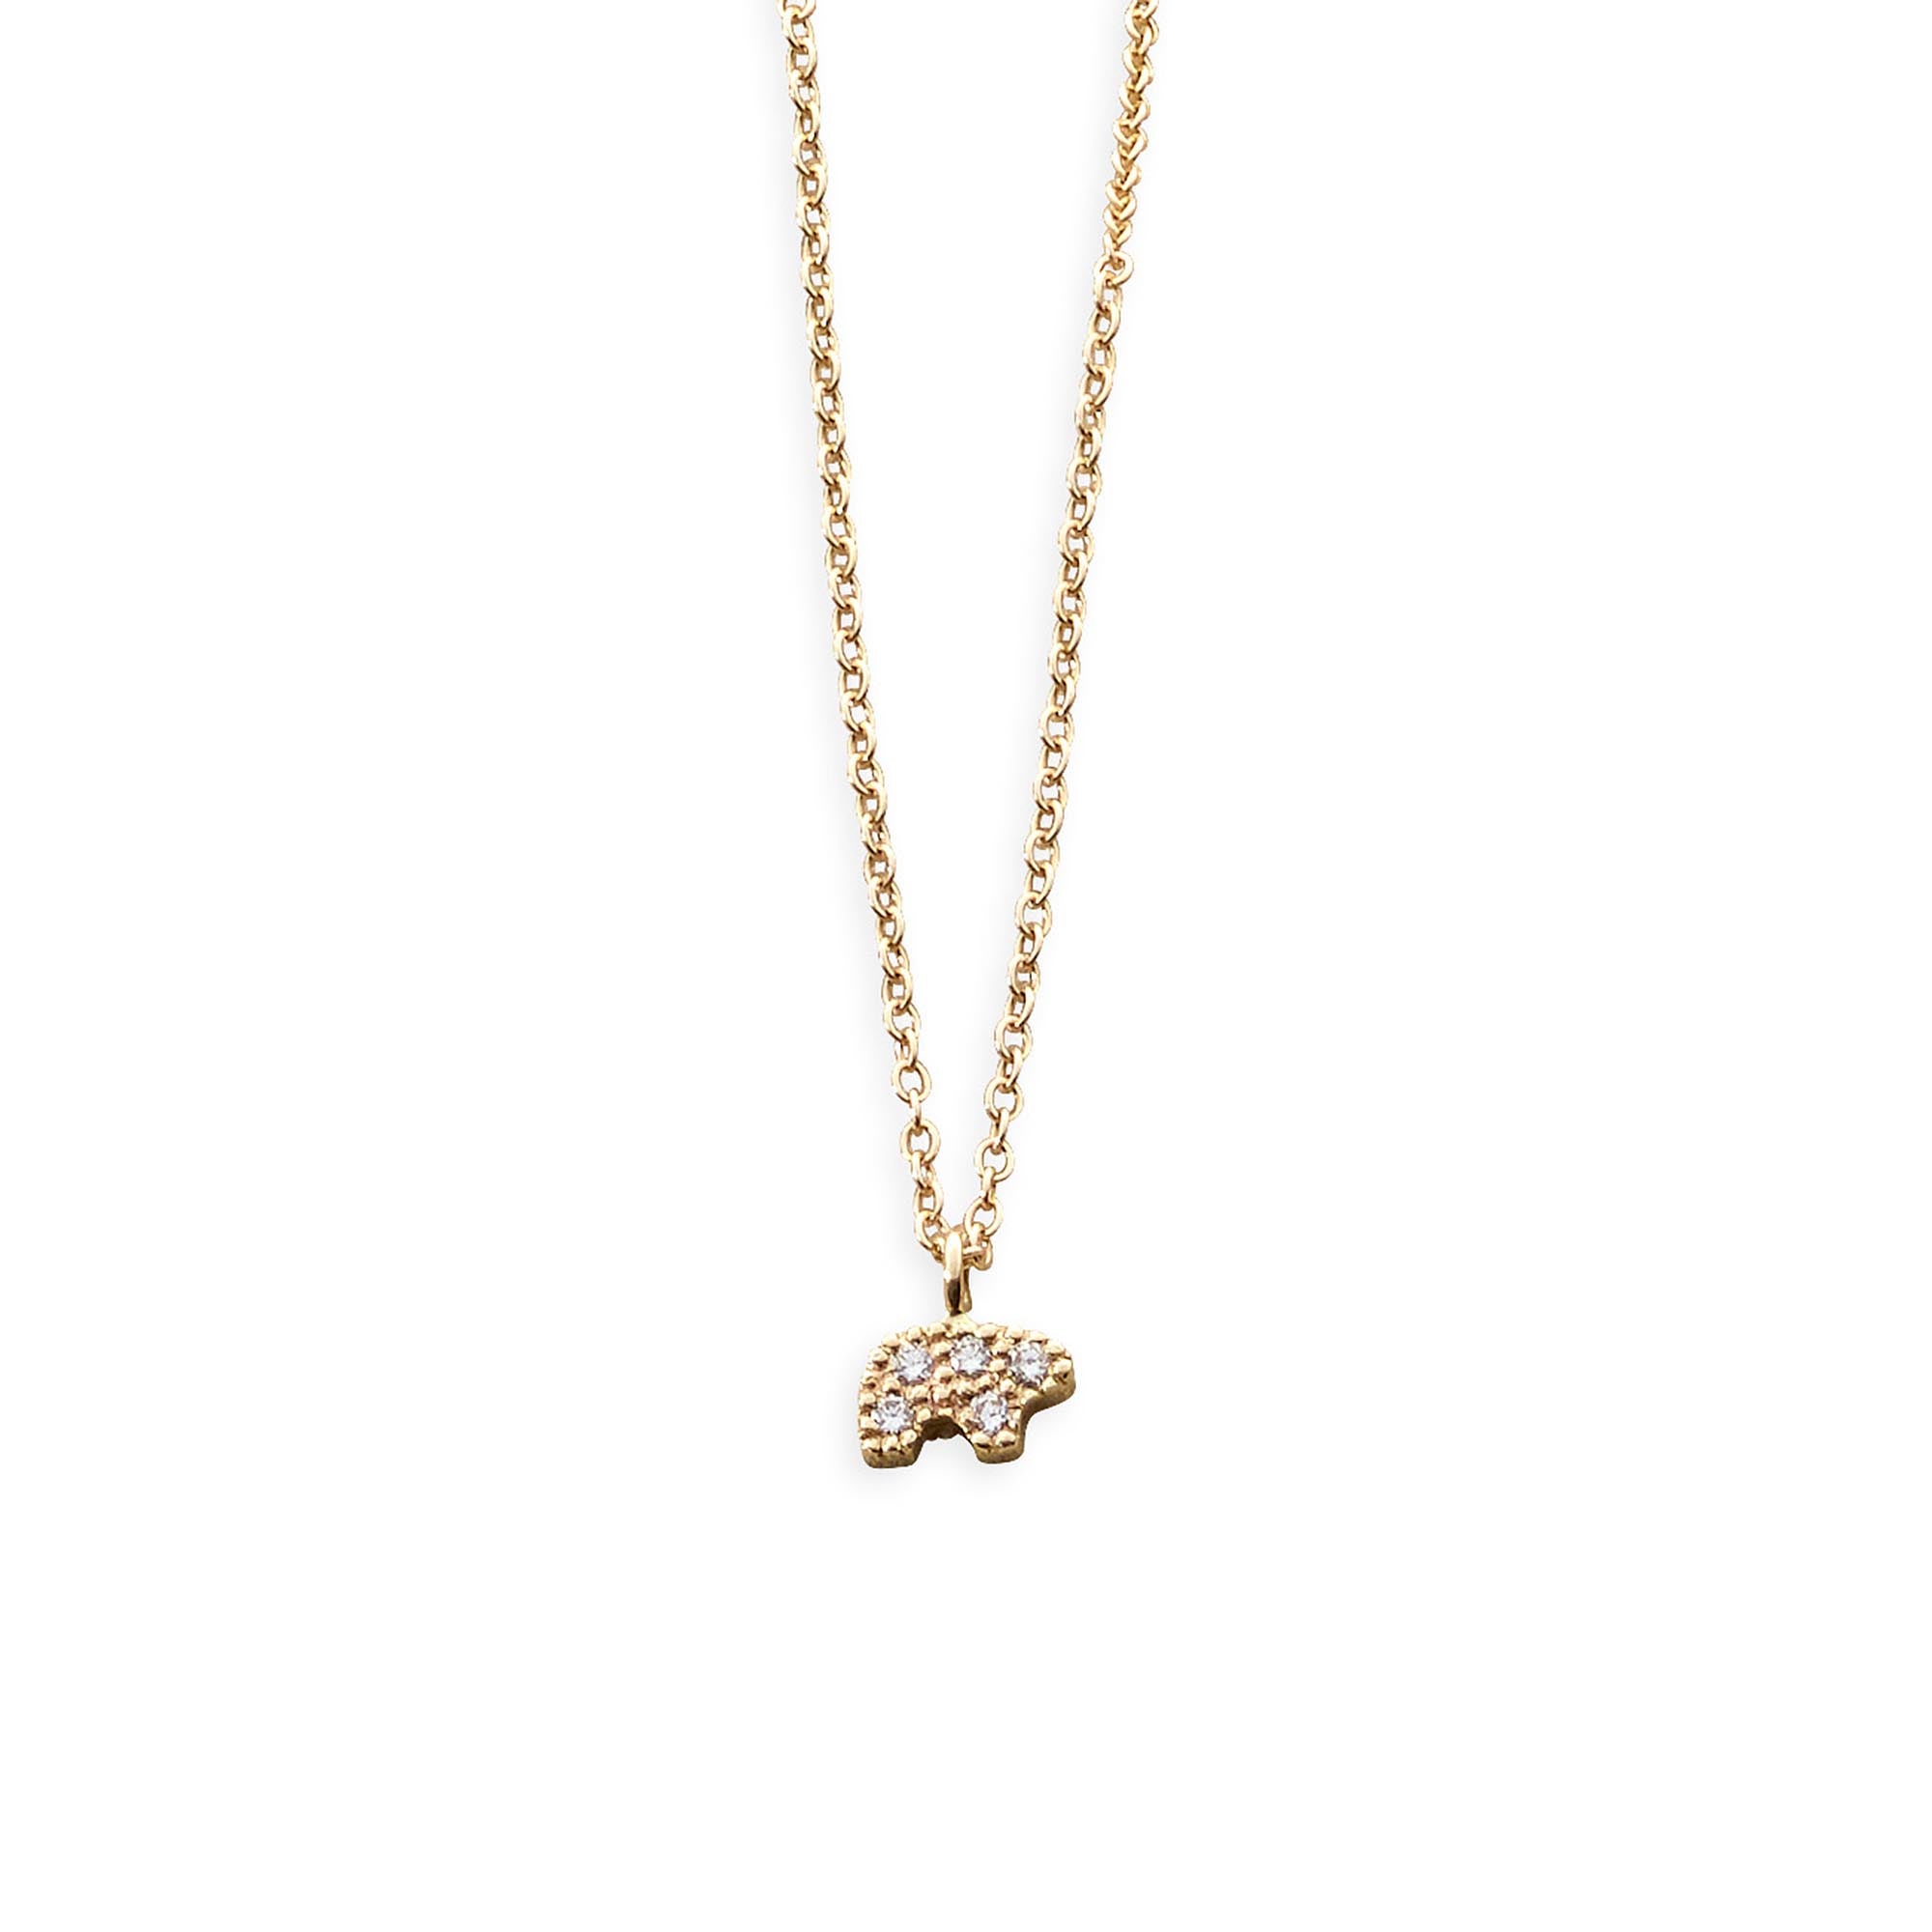 Buy Gold Teddy Bear Pendant Necklace in Stainless Steel, Cute Jewelry  Online in India - Etsy